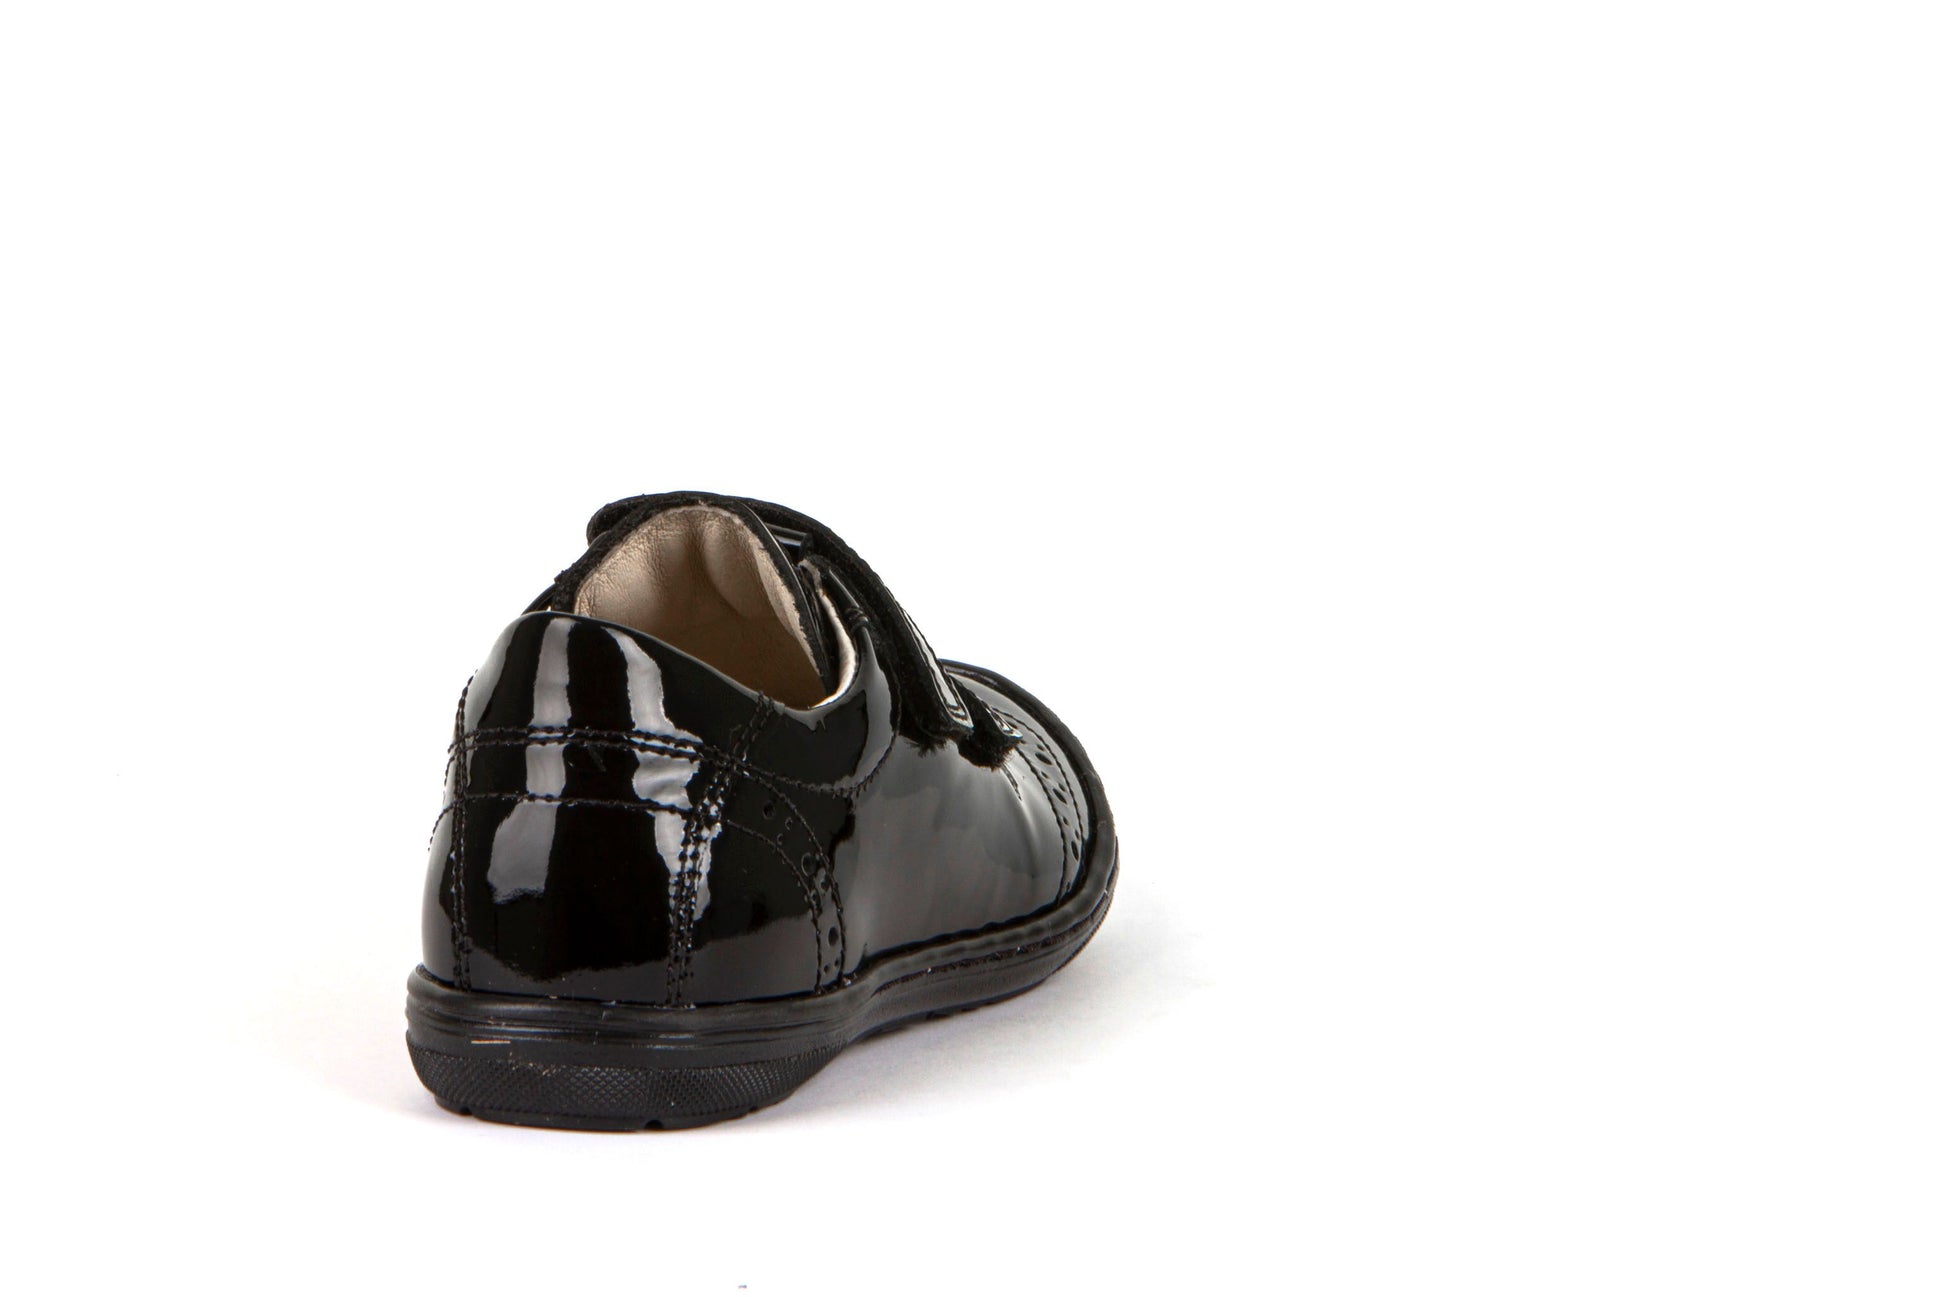 A girls school shoe by Froddo, style Mia D in black patent with velcro fastening. Back view.